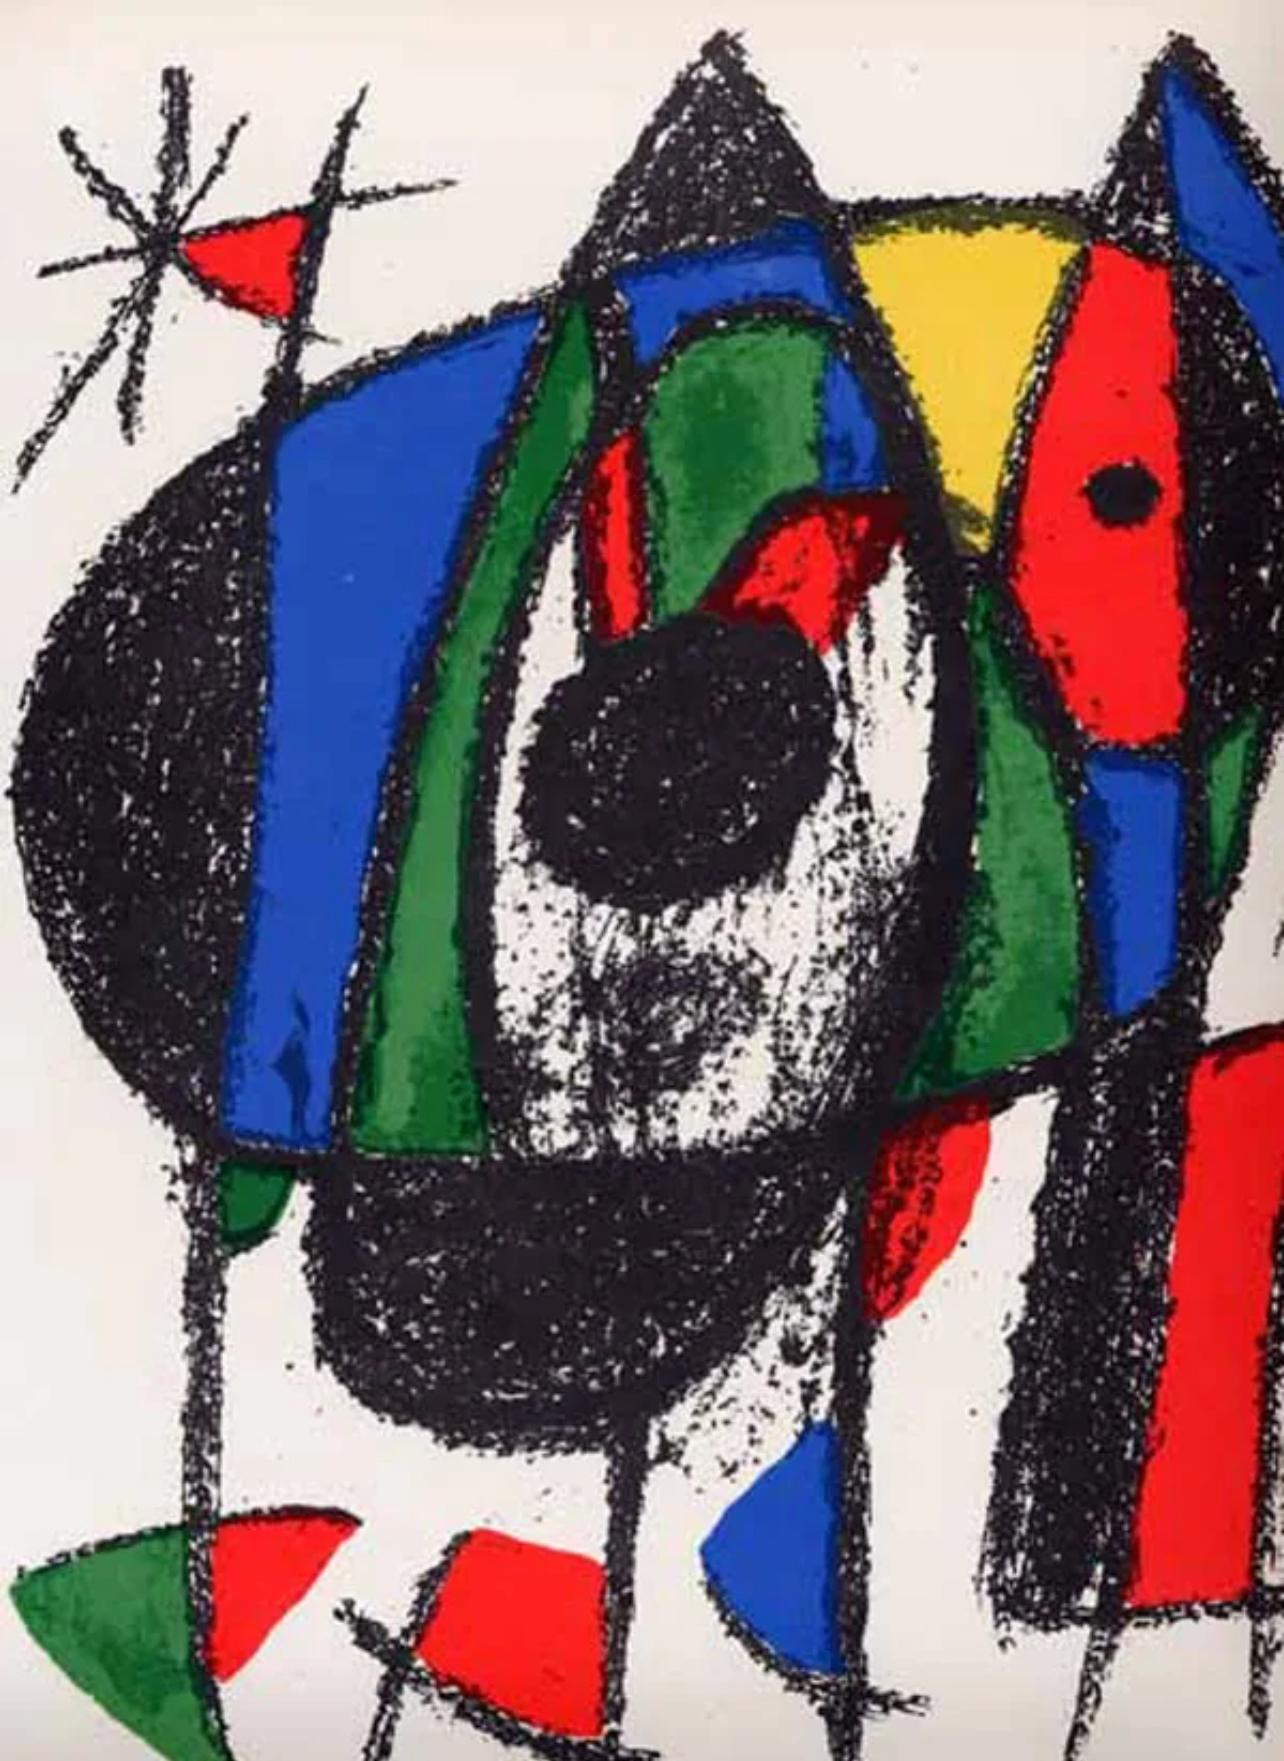 Joan Miró Abstract Print - Miro, Composition (Mourlot 1041), 1975 (after)